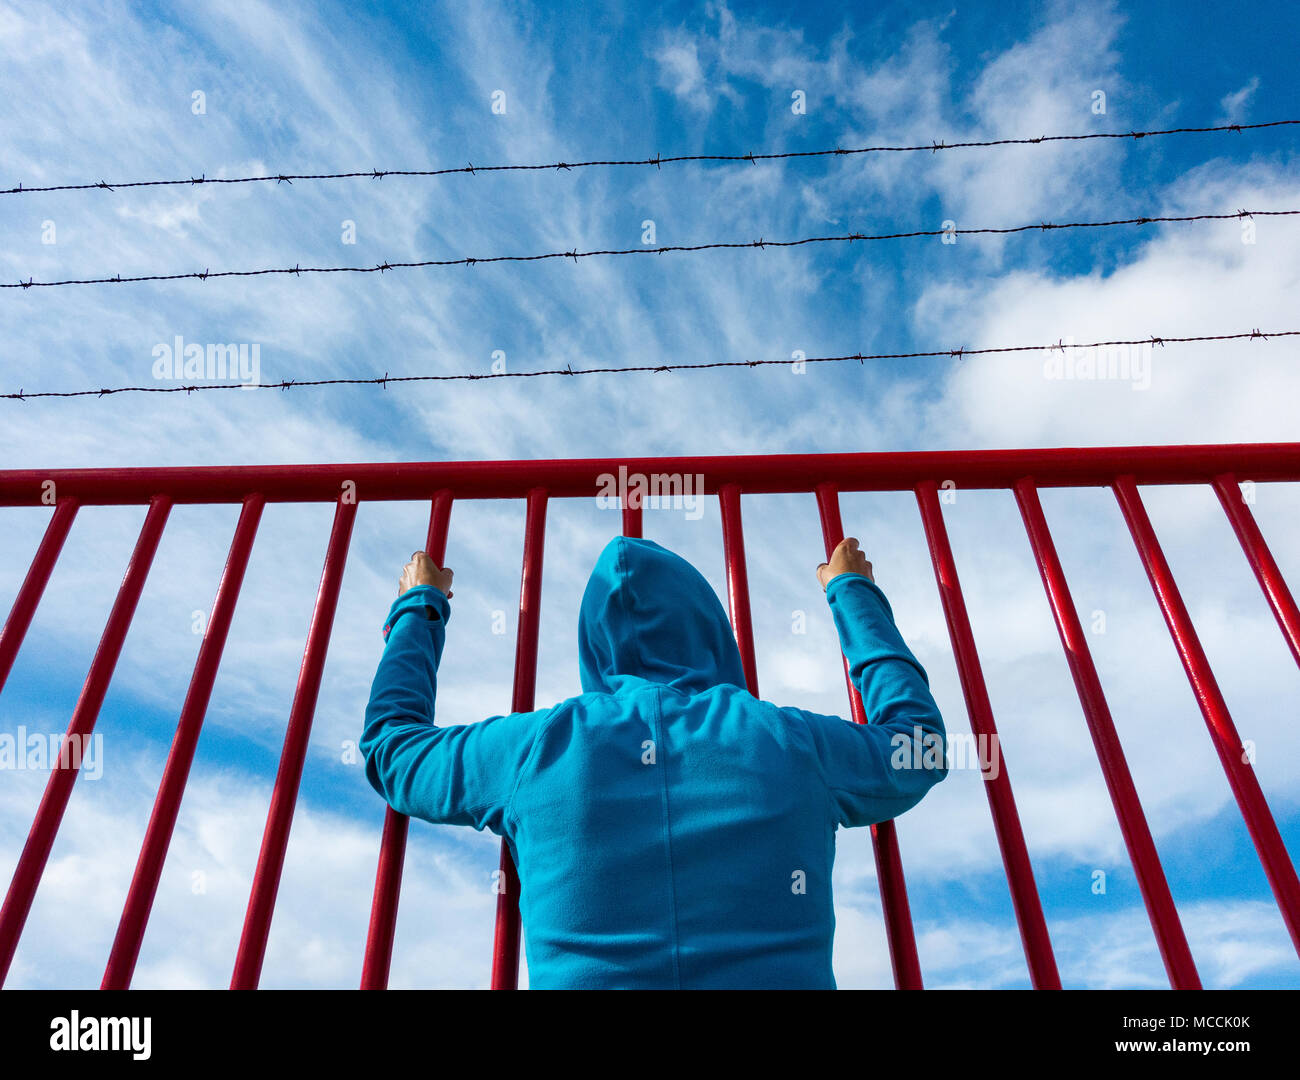 Woman behind bars topped with barbed wire: asylum,refugee,prison,detention,brexit, borders... concept image Stock Photo